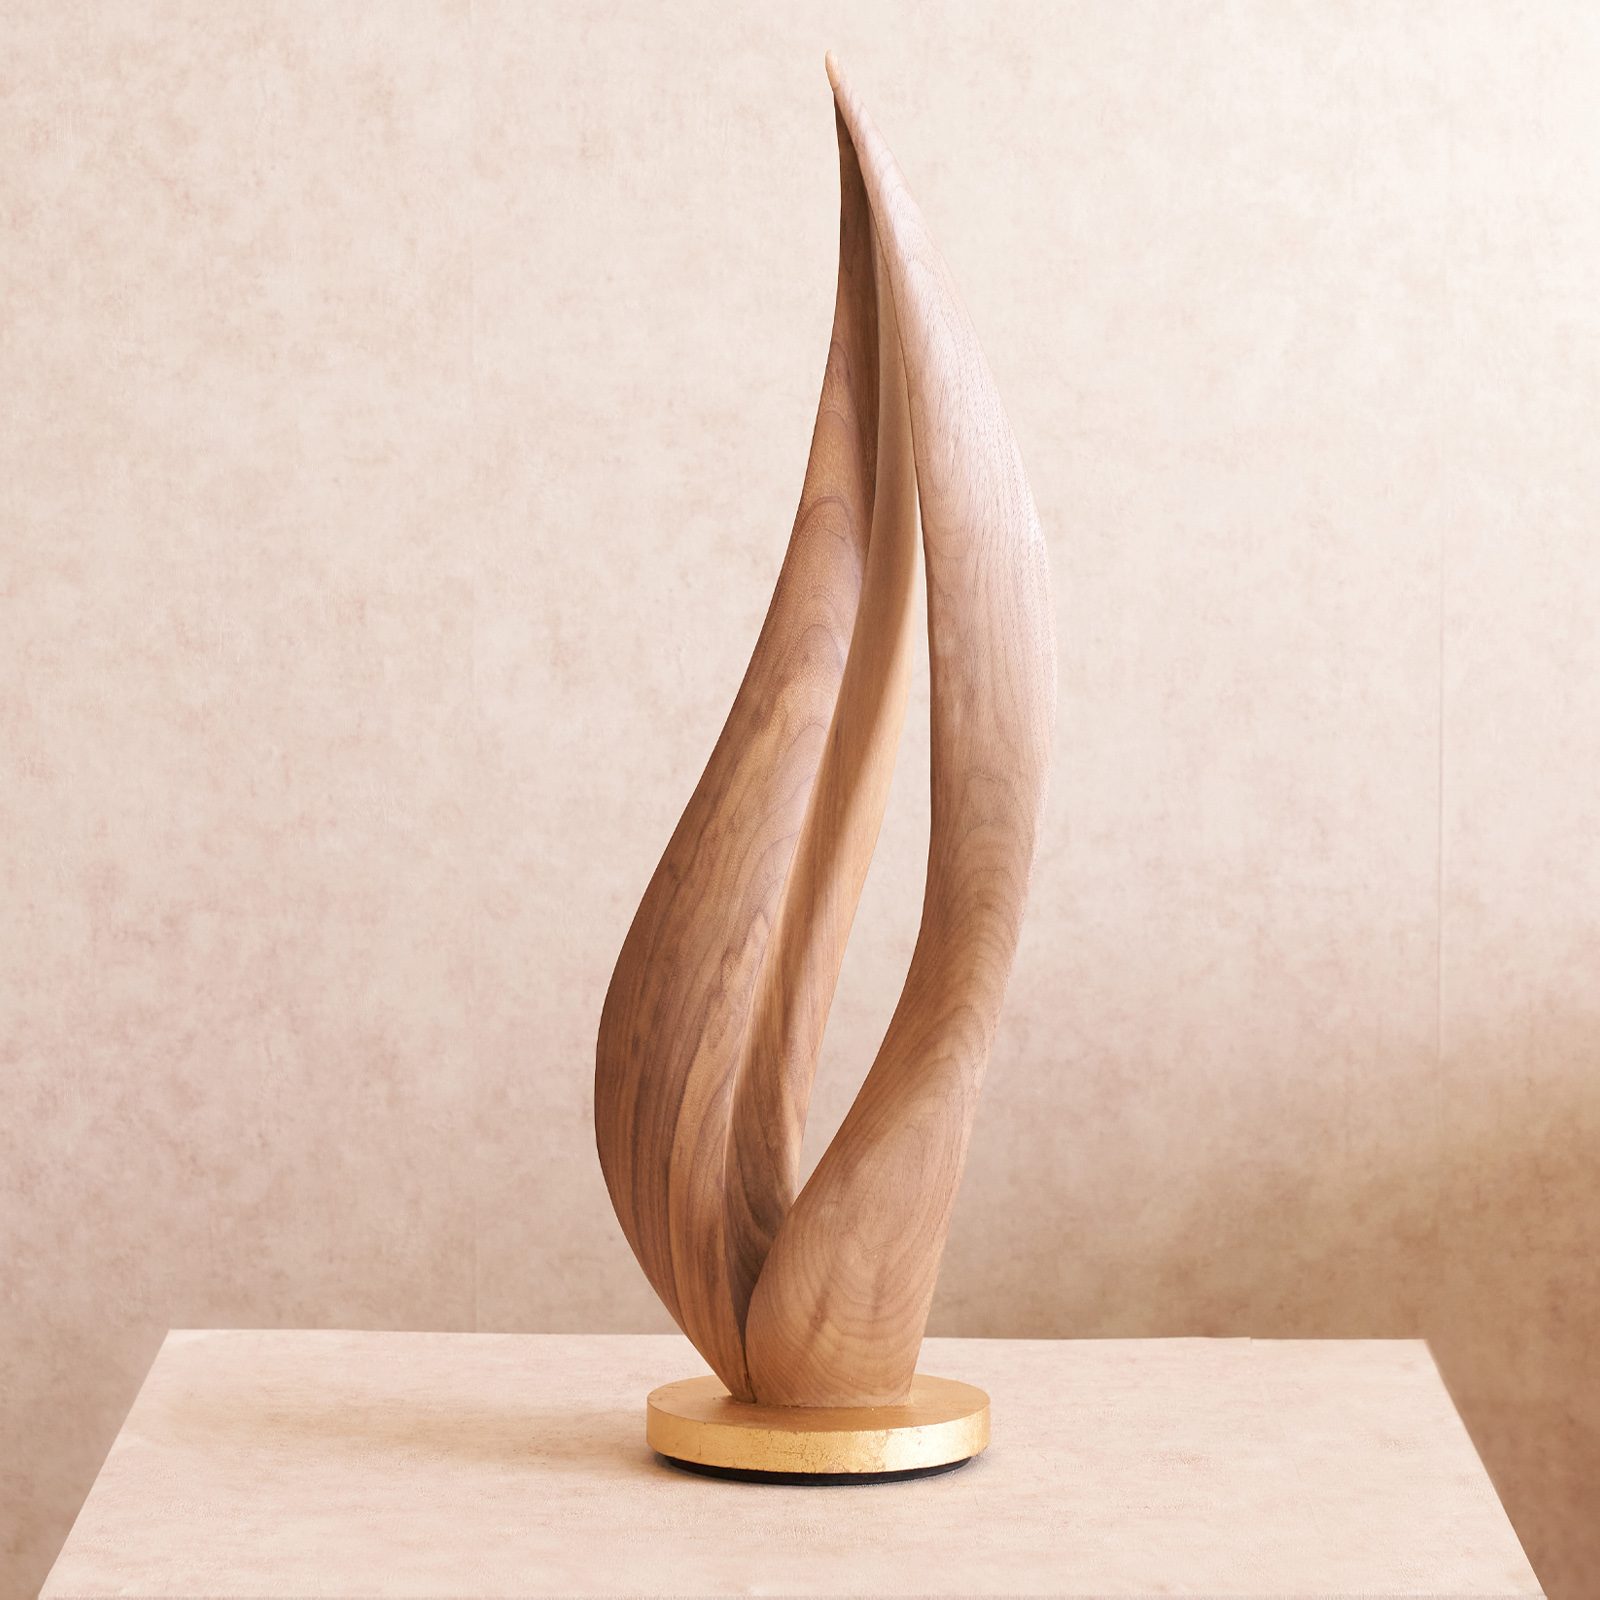 One V Sculpture in wood_Veronica Mar_1600 x 1600_3